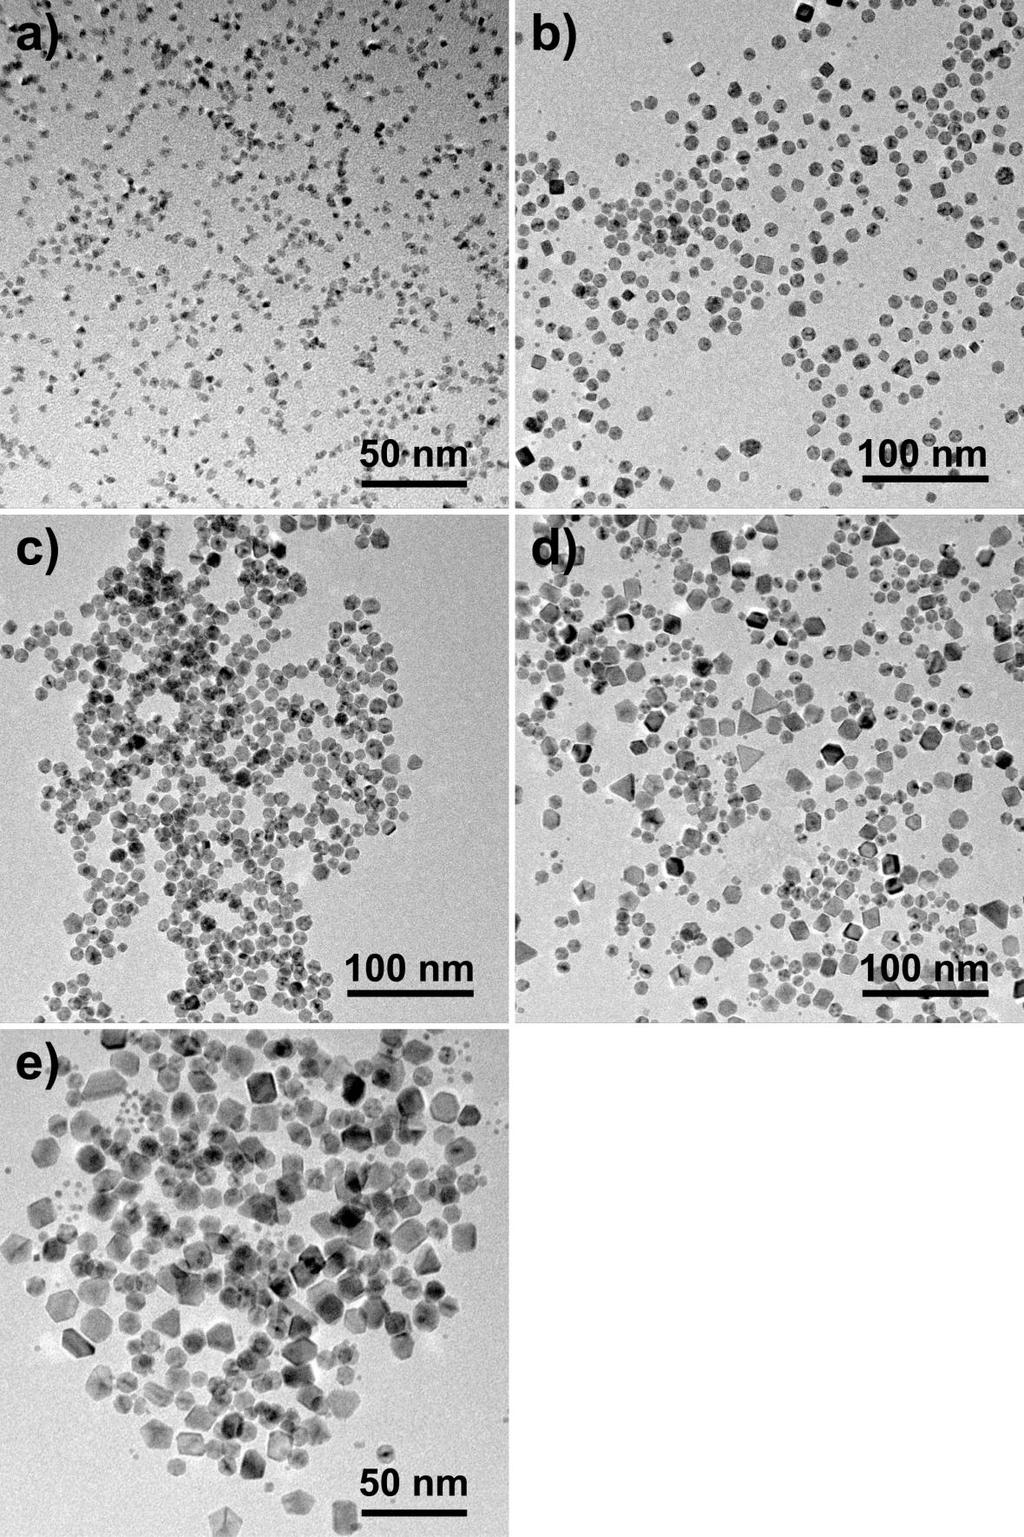 Figure S5. TEM images on the effect of HCl amounts on the formation of Pt Pd NIs. The amounts of HCl (1.0 M aqueous solution) were (a) 0 ml, (b) 0.12 ml, (c) 0.24 ml, (d) 48 ml and (e) 0.72 ml.